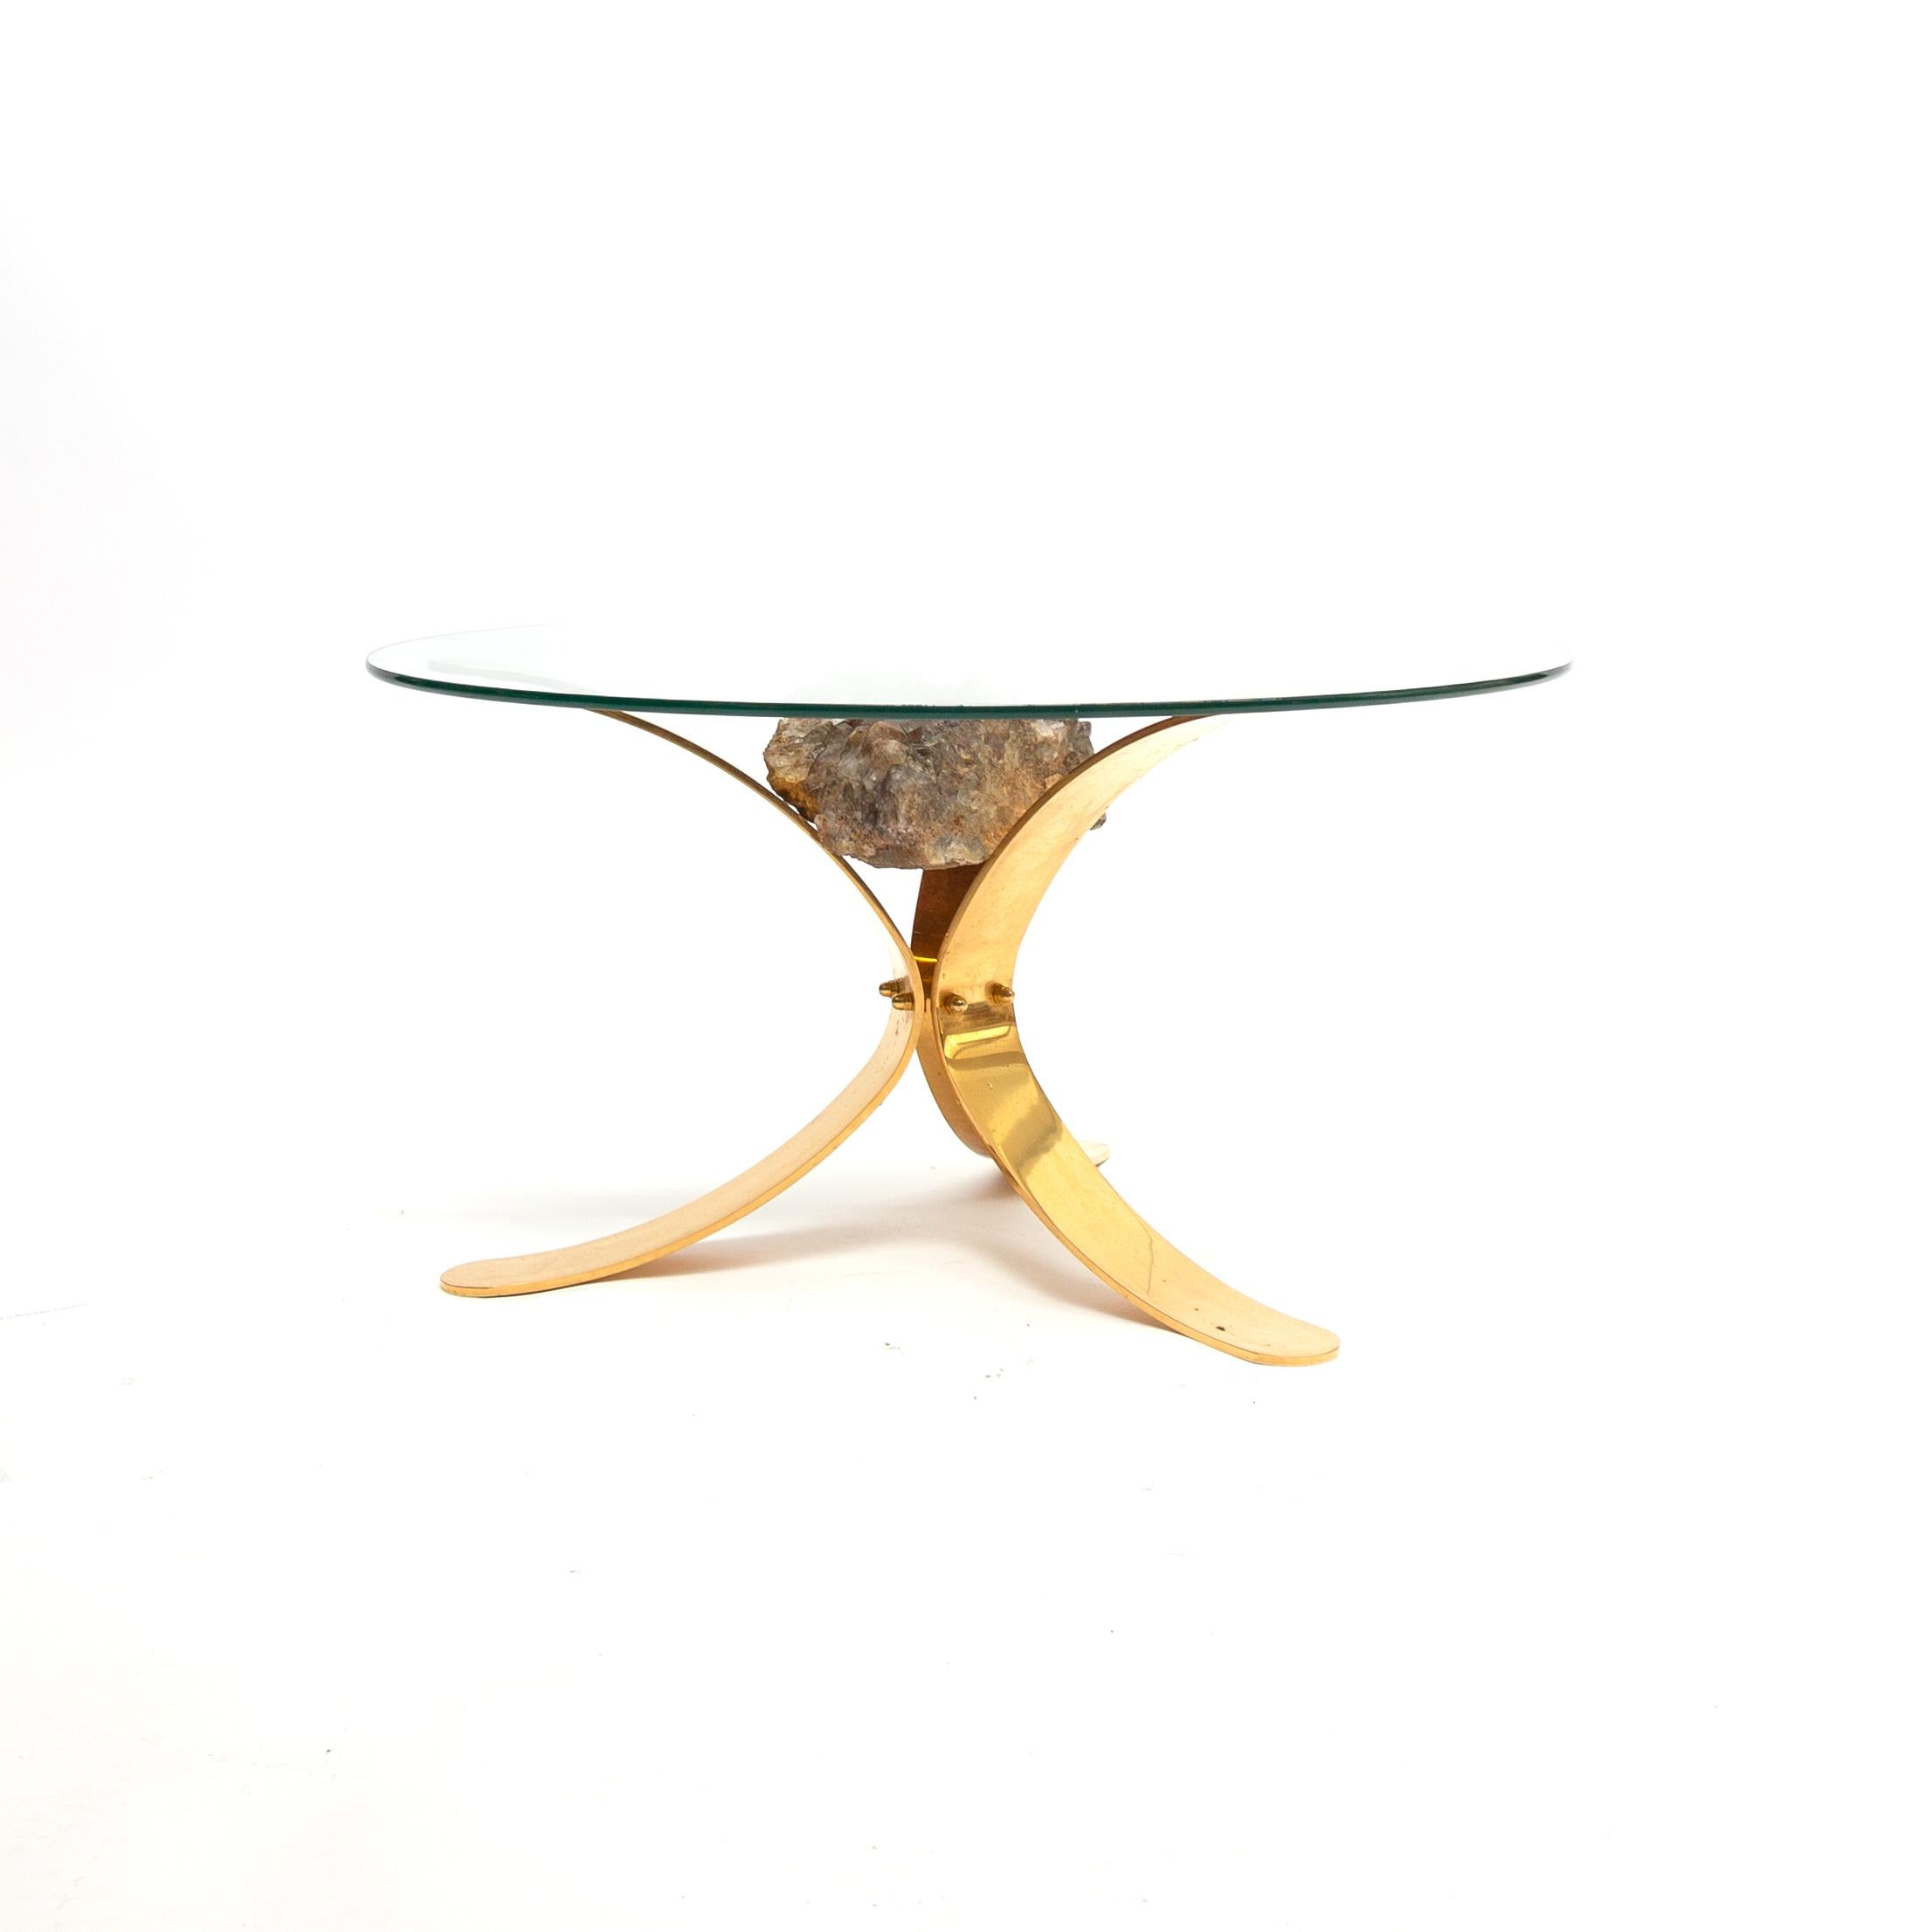 Unique Hollywood Regency brass frame glass top zircon mineral stones coffee table 1970s in Jaques Duval Brasseur style.
The transparent glass top on this eccentric coffee table from the 1970s allows you to see unobstructed to the stunning base